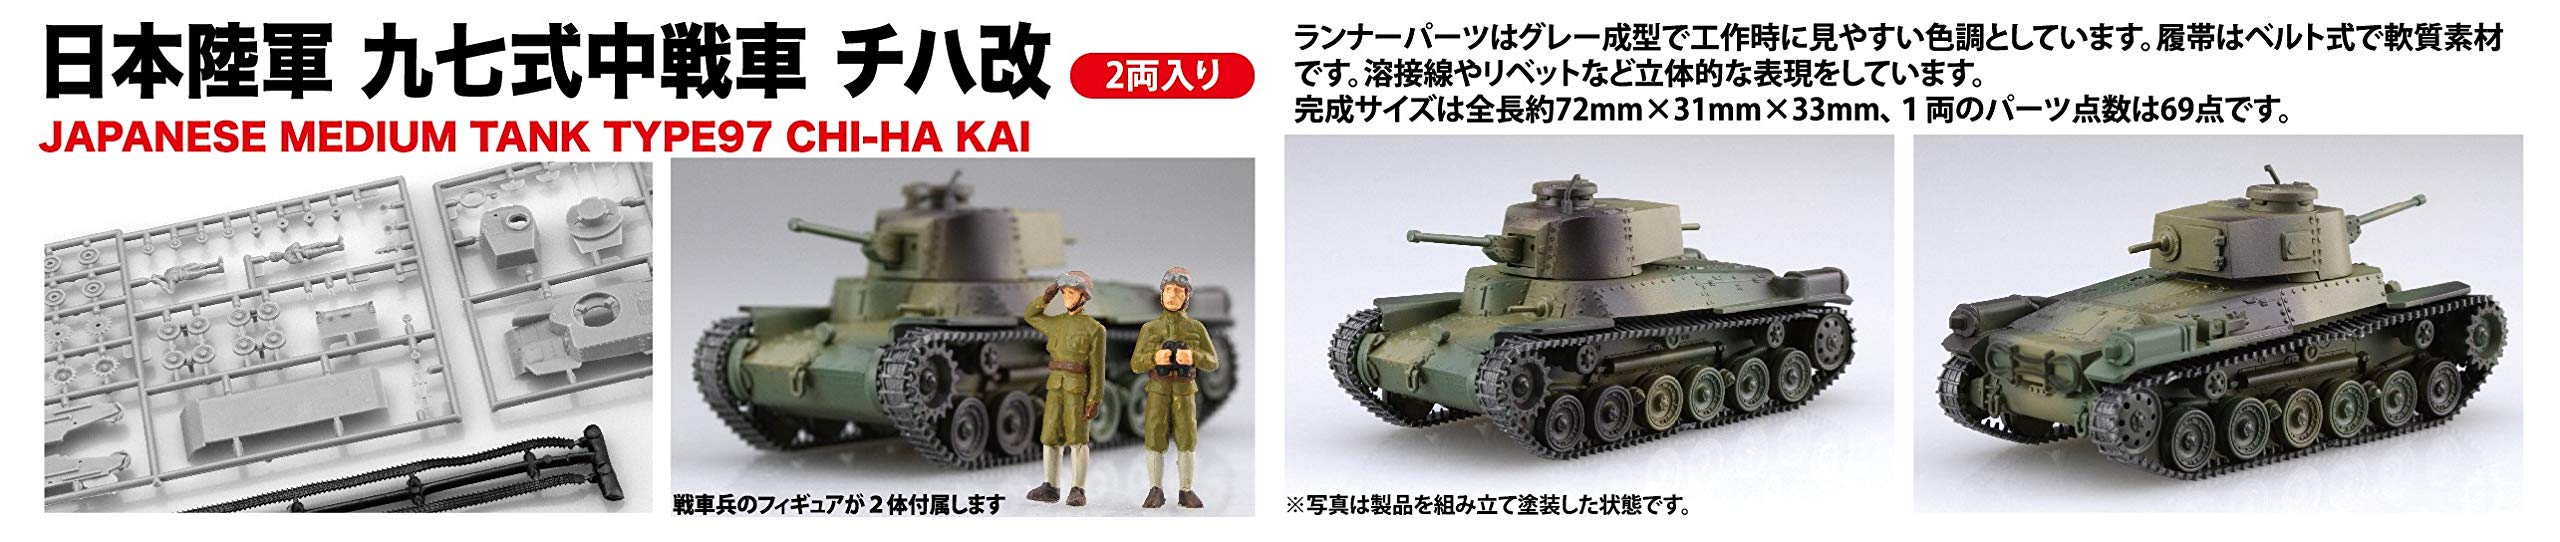 FUJIMI Special World Armour 1/76 Middle Tank Type 97 Chi-Ha Kai 2Pc Special Version W/ Infantry Plastic Model